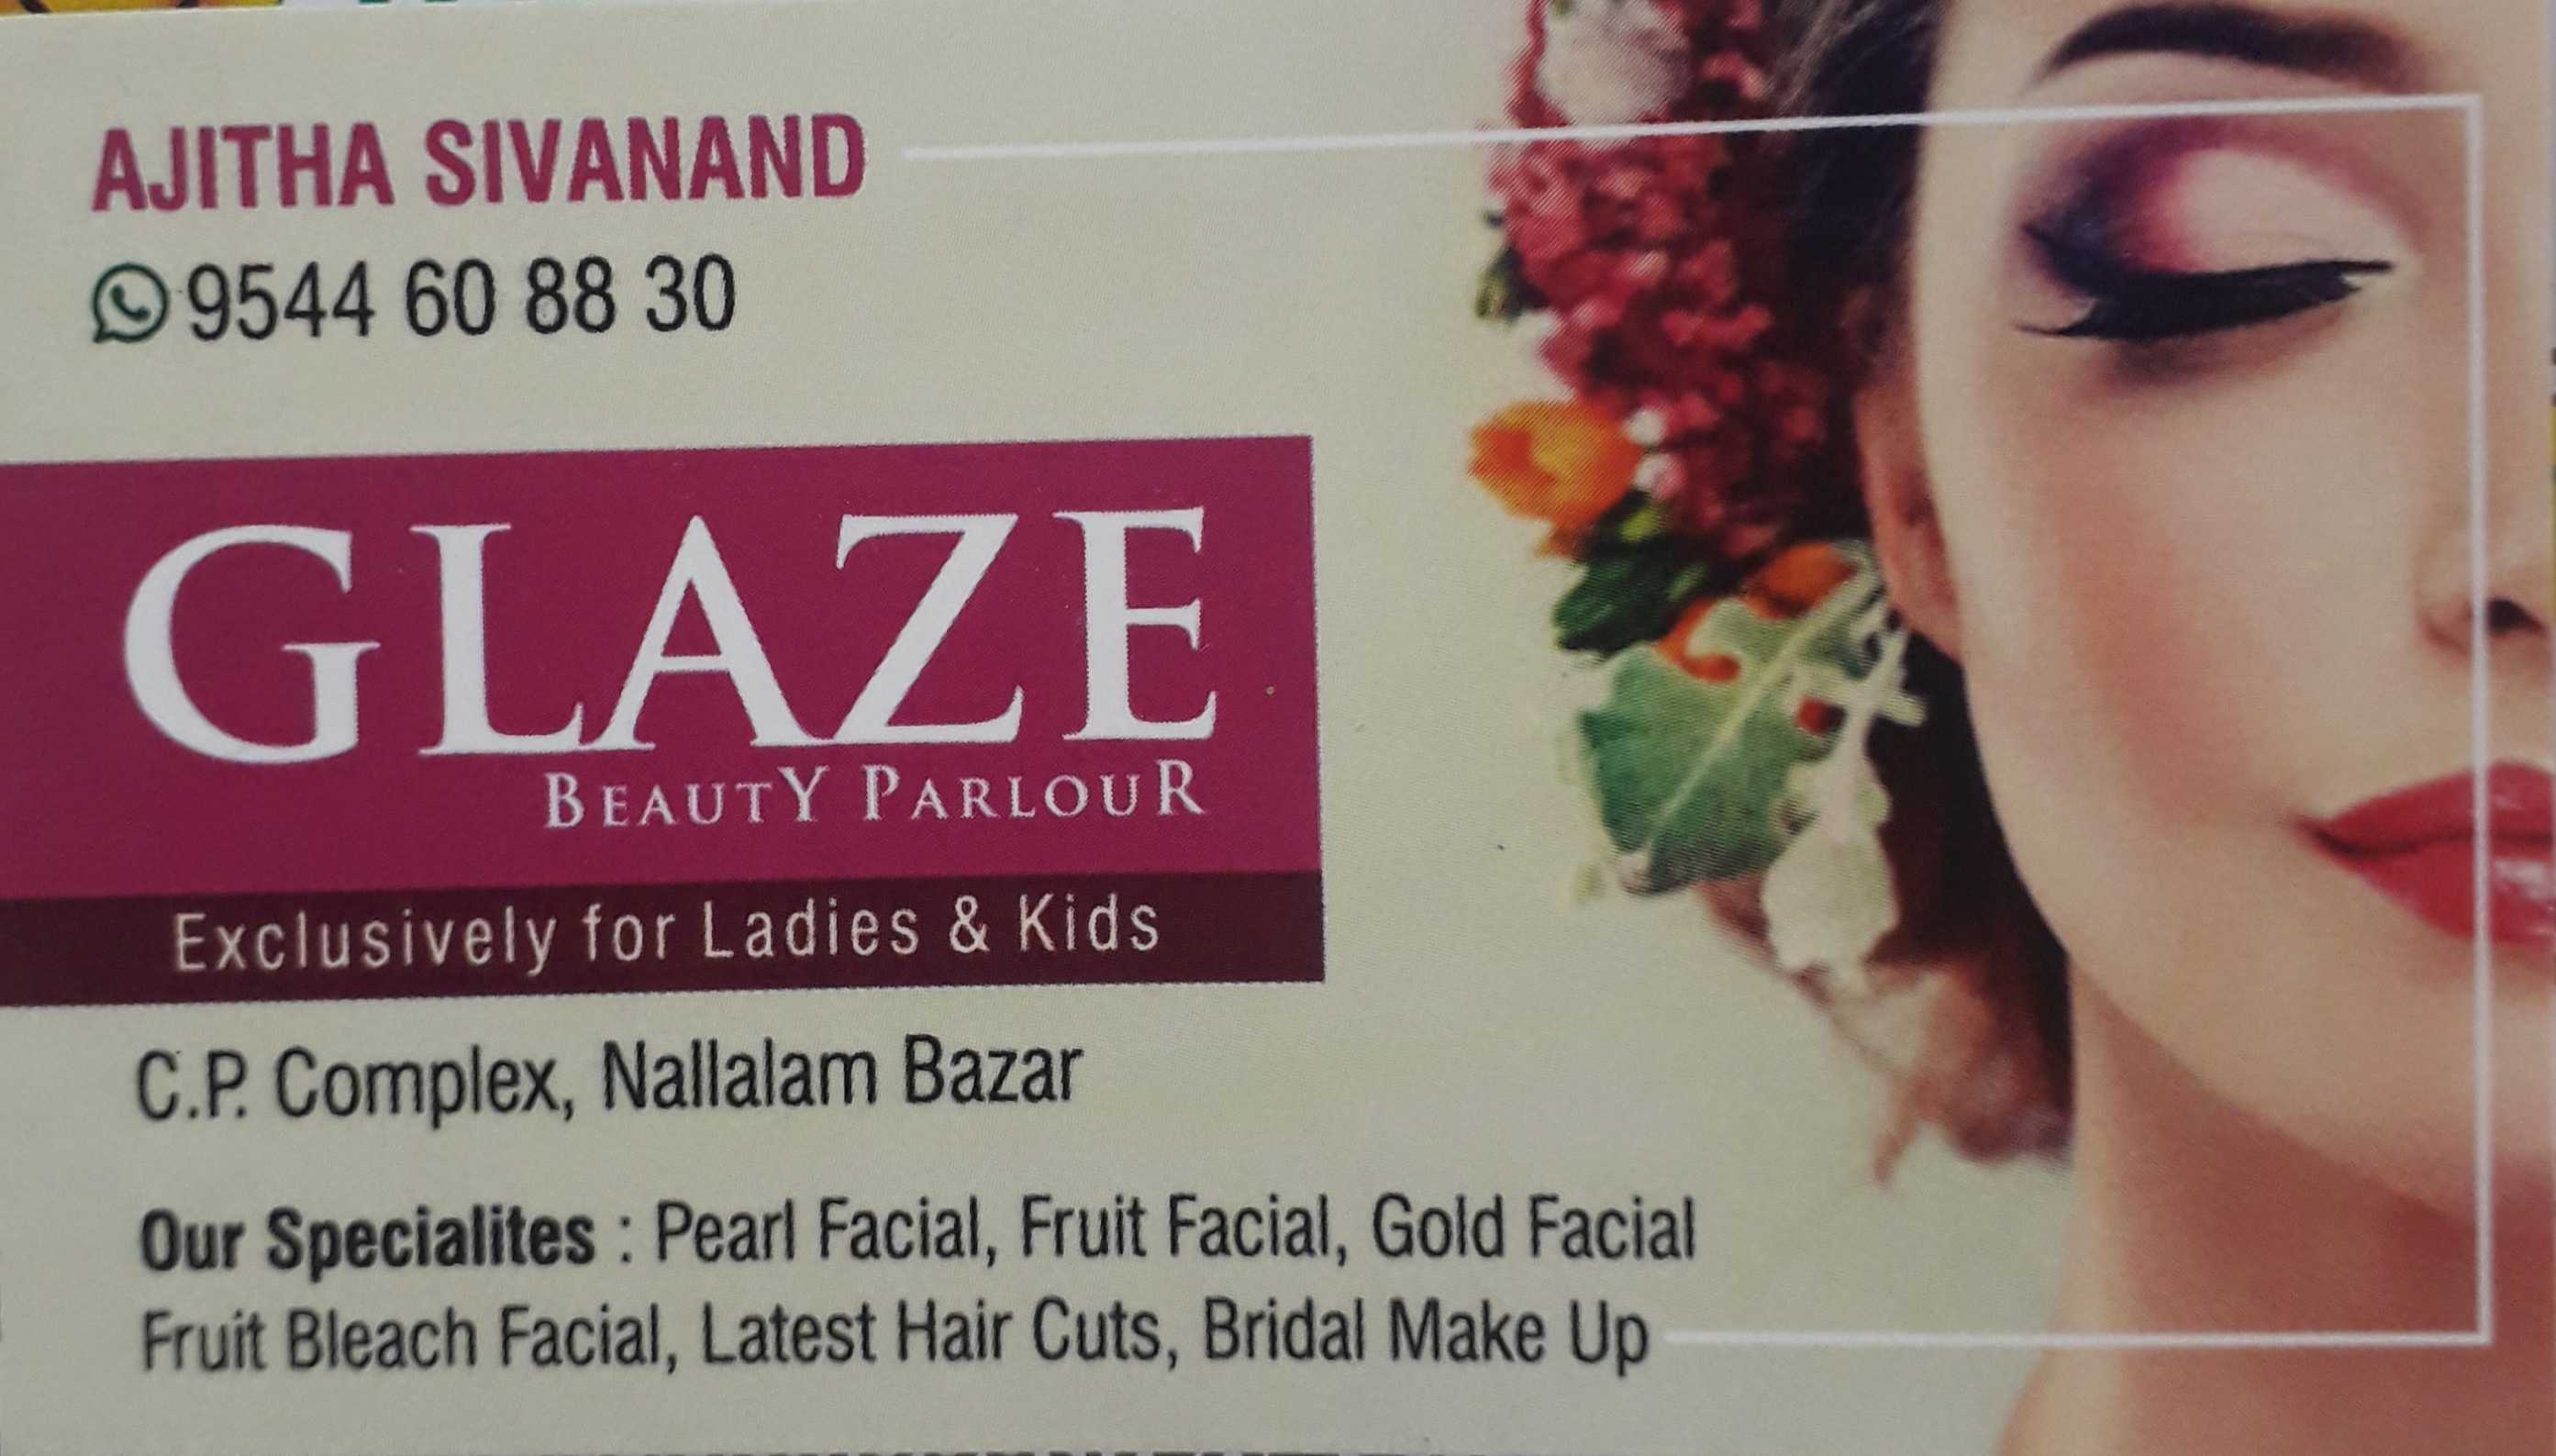 GLAZE Exclusively for Ladies & Kids, BEAUTY PARLOUR,  service in Moder bazar, Kozhikode